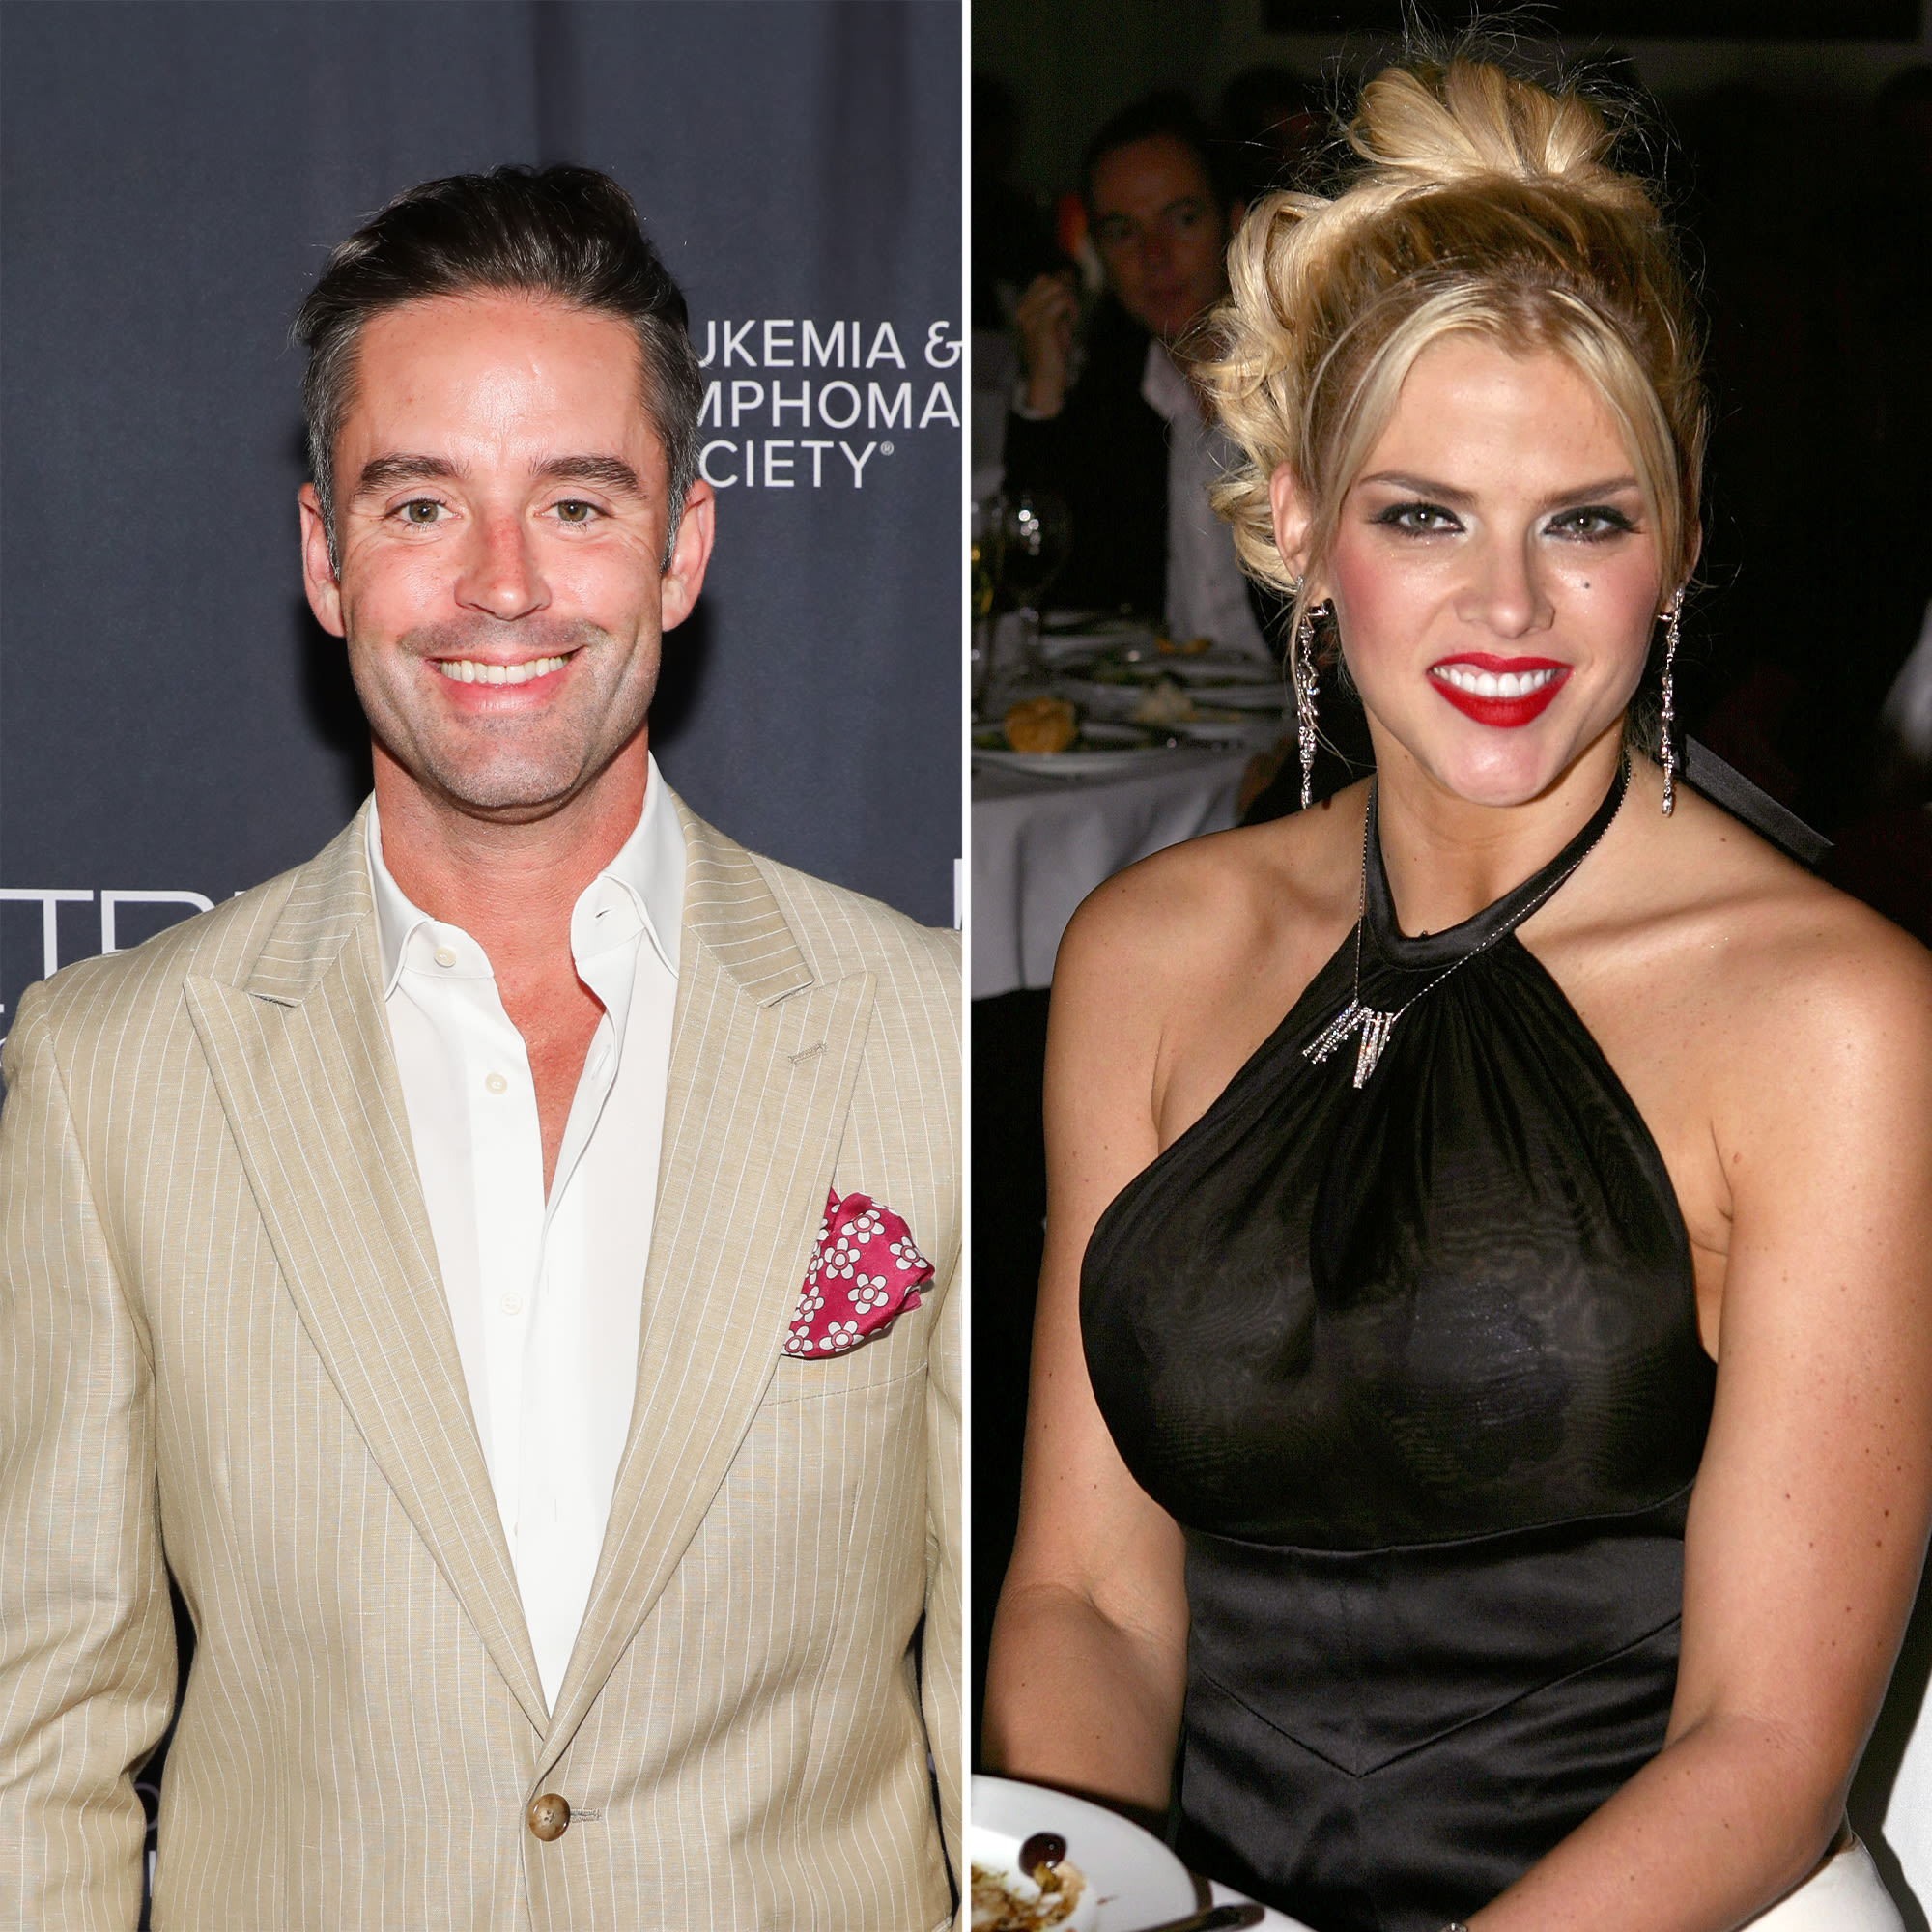 The Valley’s Jesse Lally Reveals His Surprising Past With Anna Nicole Smith